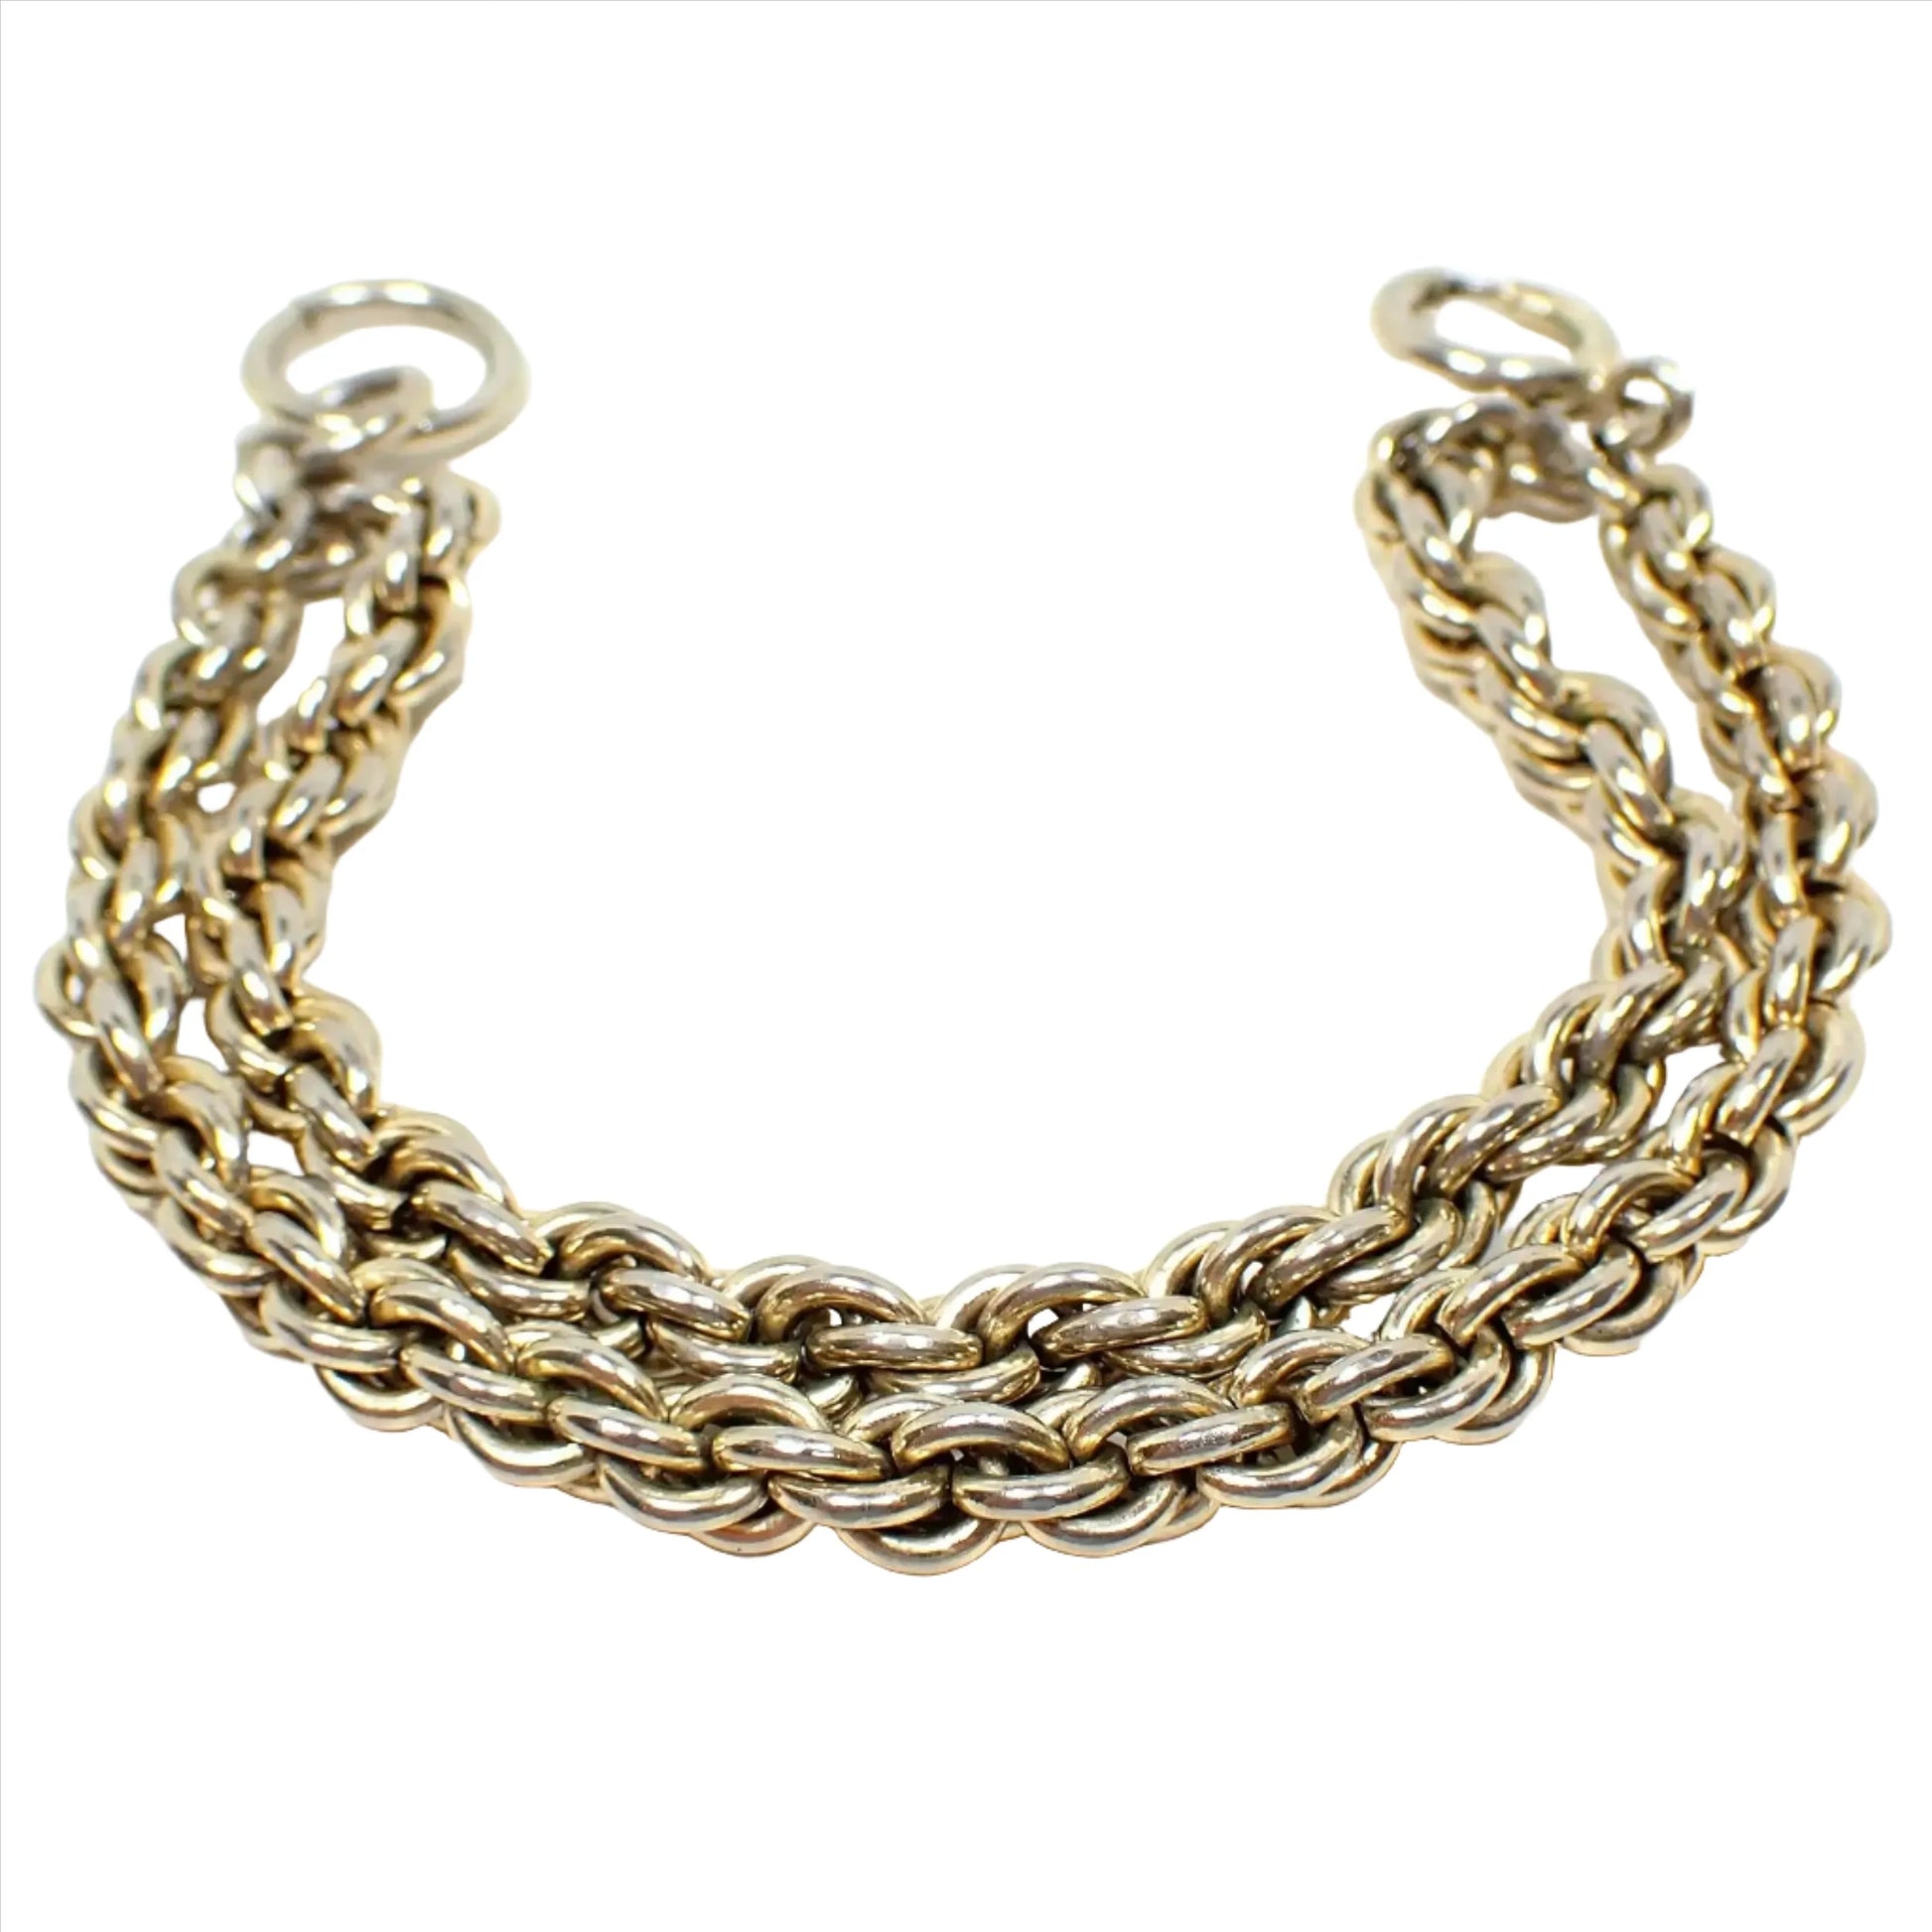 Enlarged view of the Mid Century vintage multi strand chain bracelet. The metal is a light gold tone plated color. There are two strands of wide rope chain attached by a large round jump ring on one end and a large round spring ring clasp on the other.